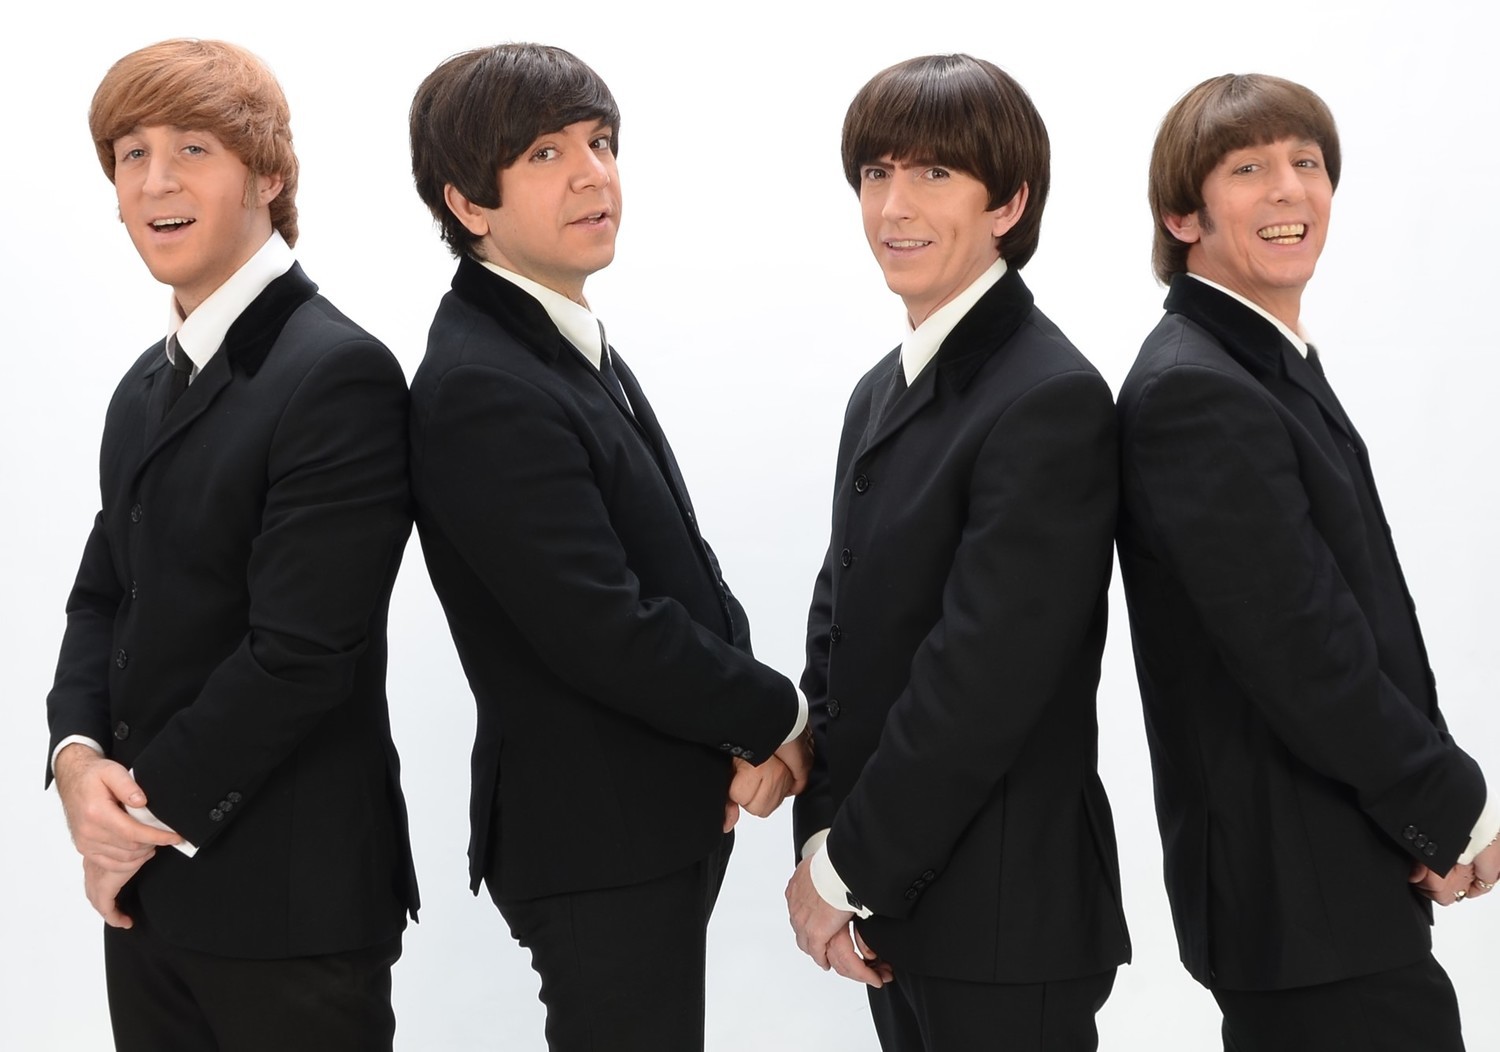 Emmy-Winning Beatles Tribute To Wrap Up Northeast Tour In Cape Cod 